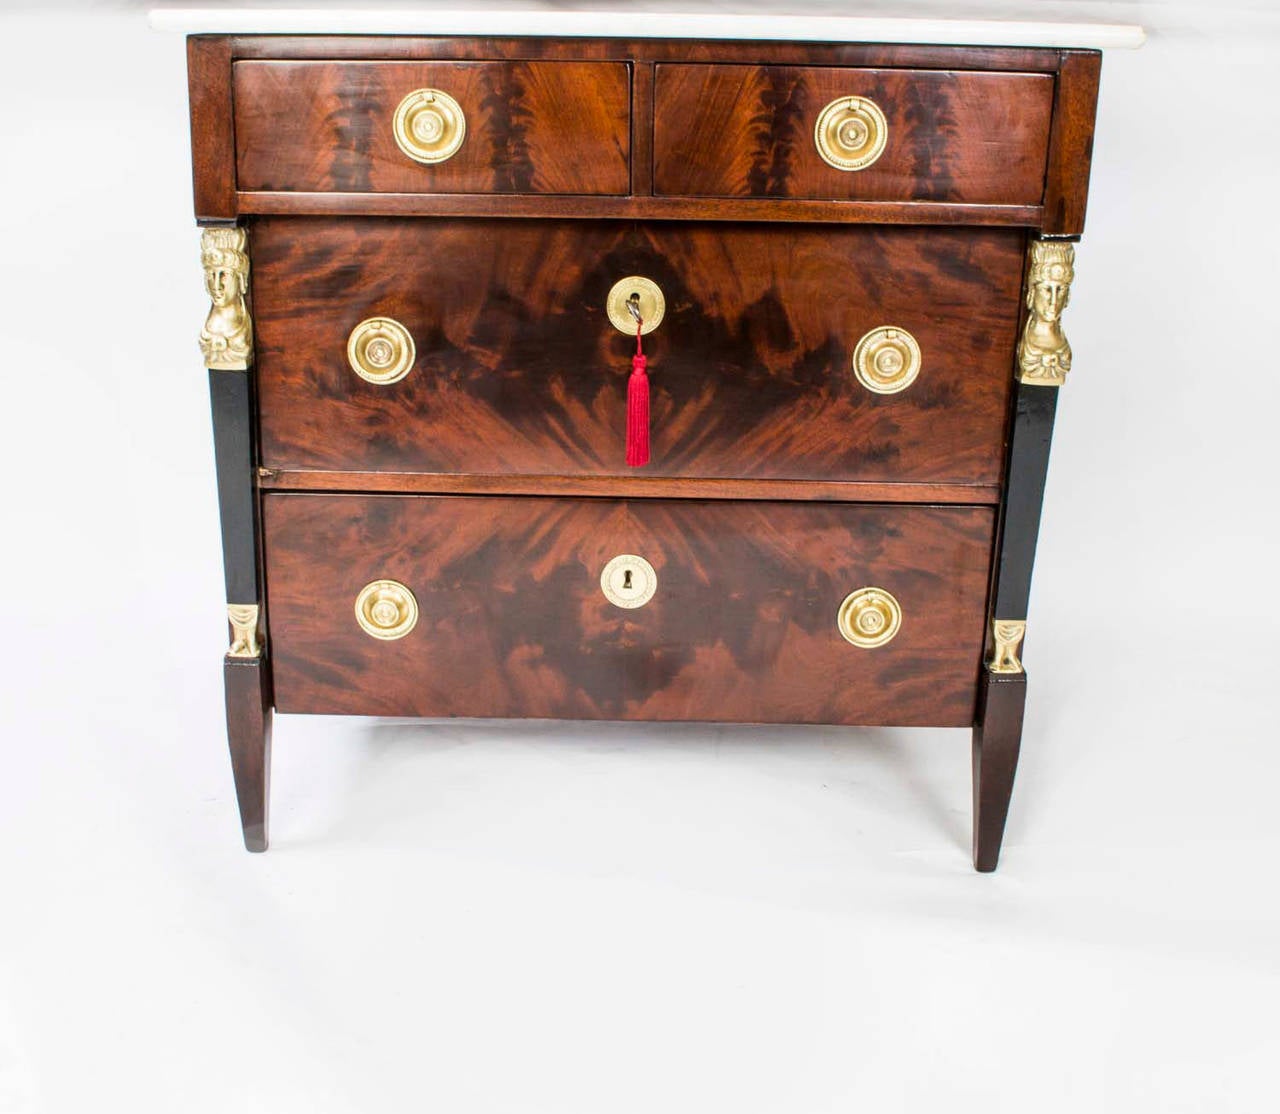 This is a stunning small antique French Empire chest which was crafted from the most beautiful flame mahogany and dates from circa 1820. 

The commode has two half width drawers above two full width drawers. It has the most wonderful ormolu